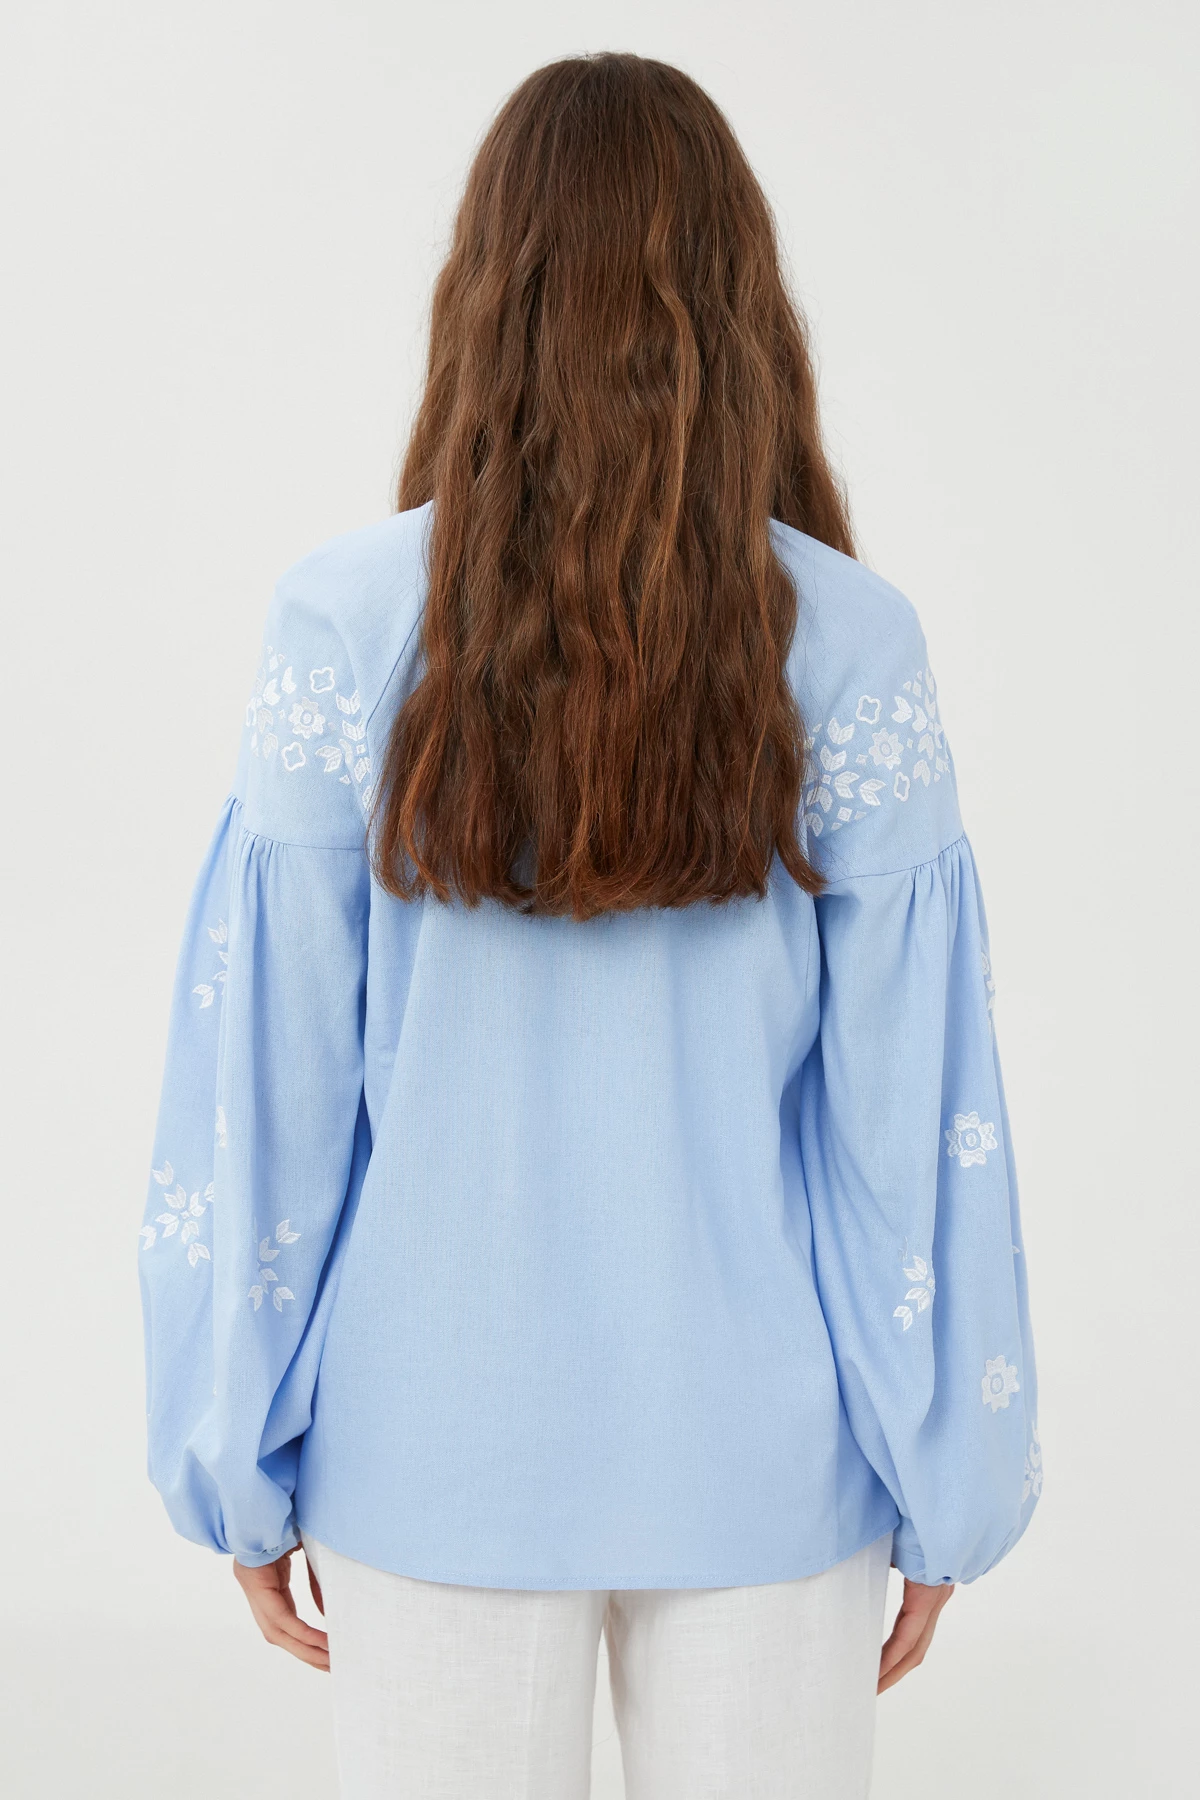 Embroidered shirt "Malvy" with blue linen, photo 4